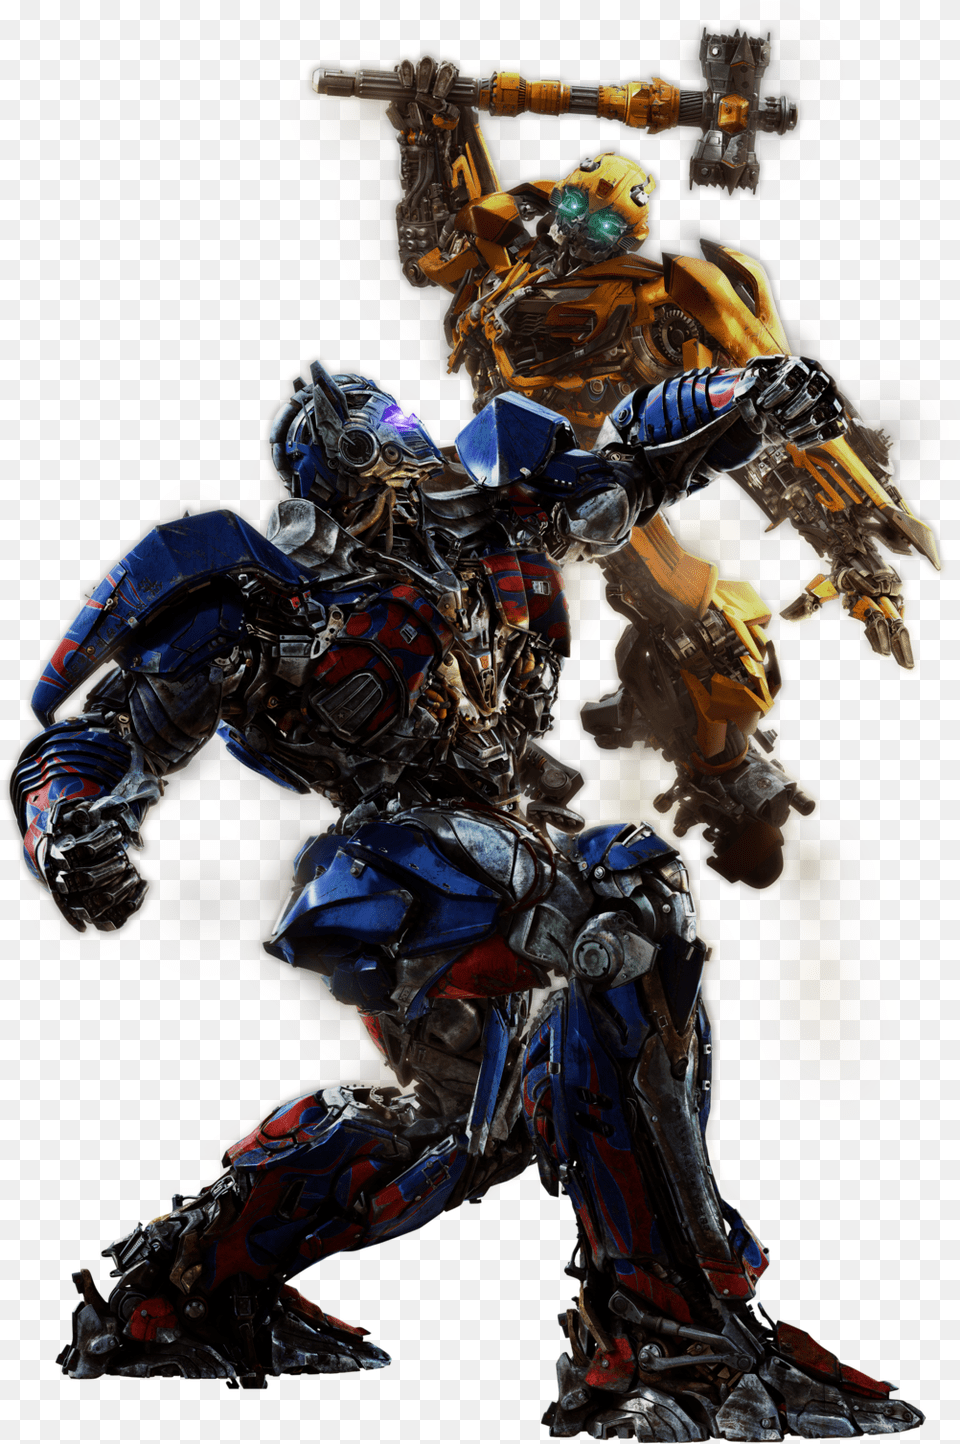 Bumblebee Optimus Prime Hound Transformers, Toy, Robot, Adult, Person Png